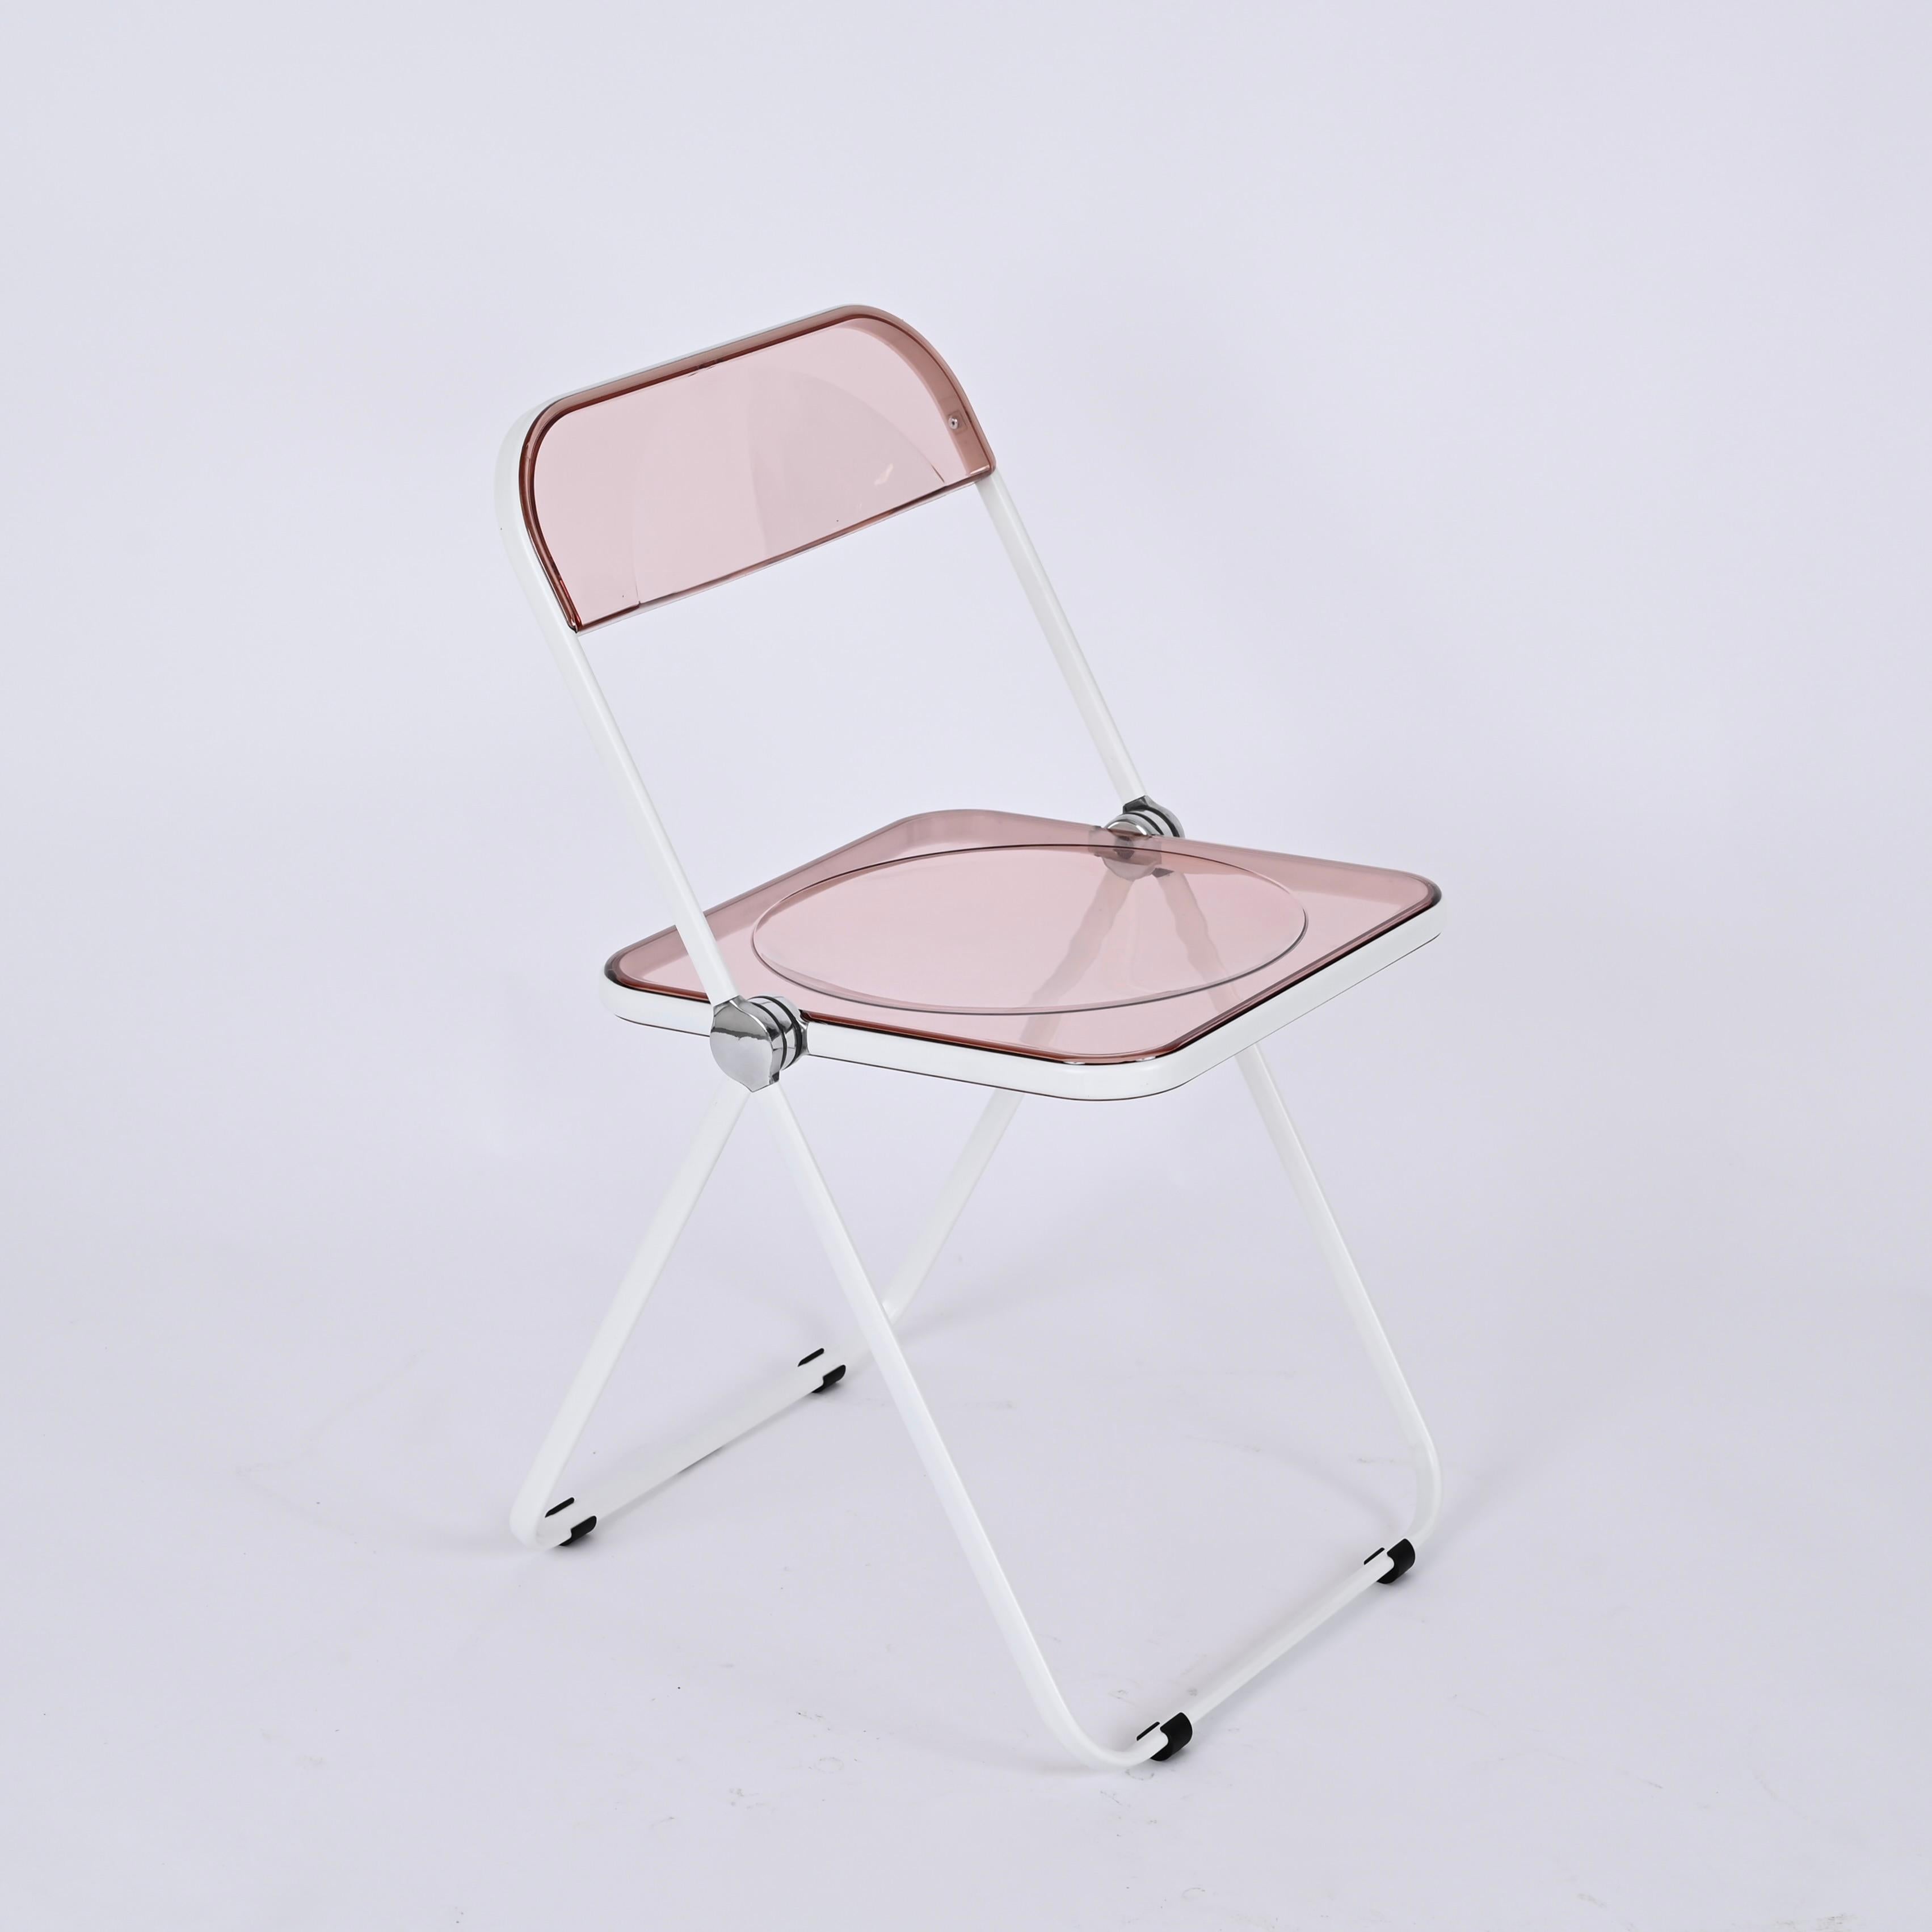 Giancarlo Piretti Lucite Pink and White Folding Plia Chairs for Castelli, 1970s For Sale 1